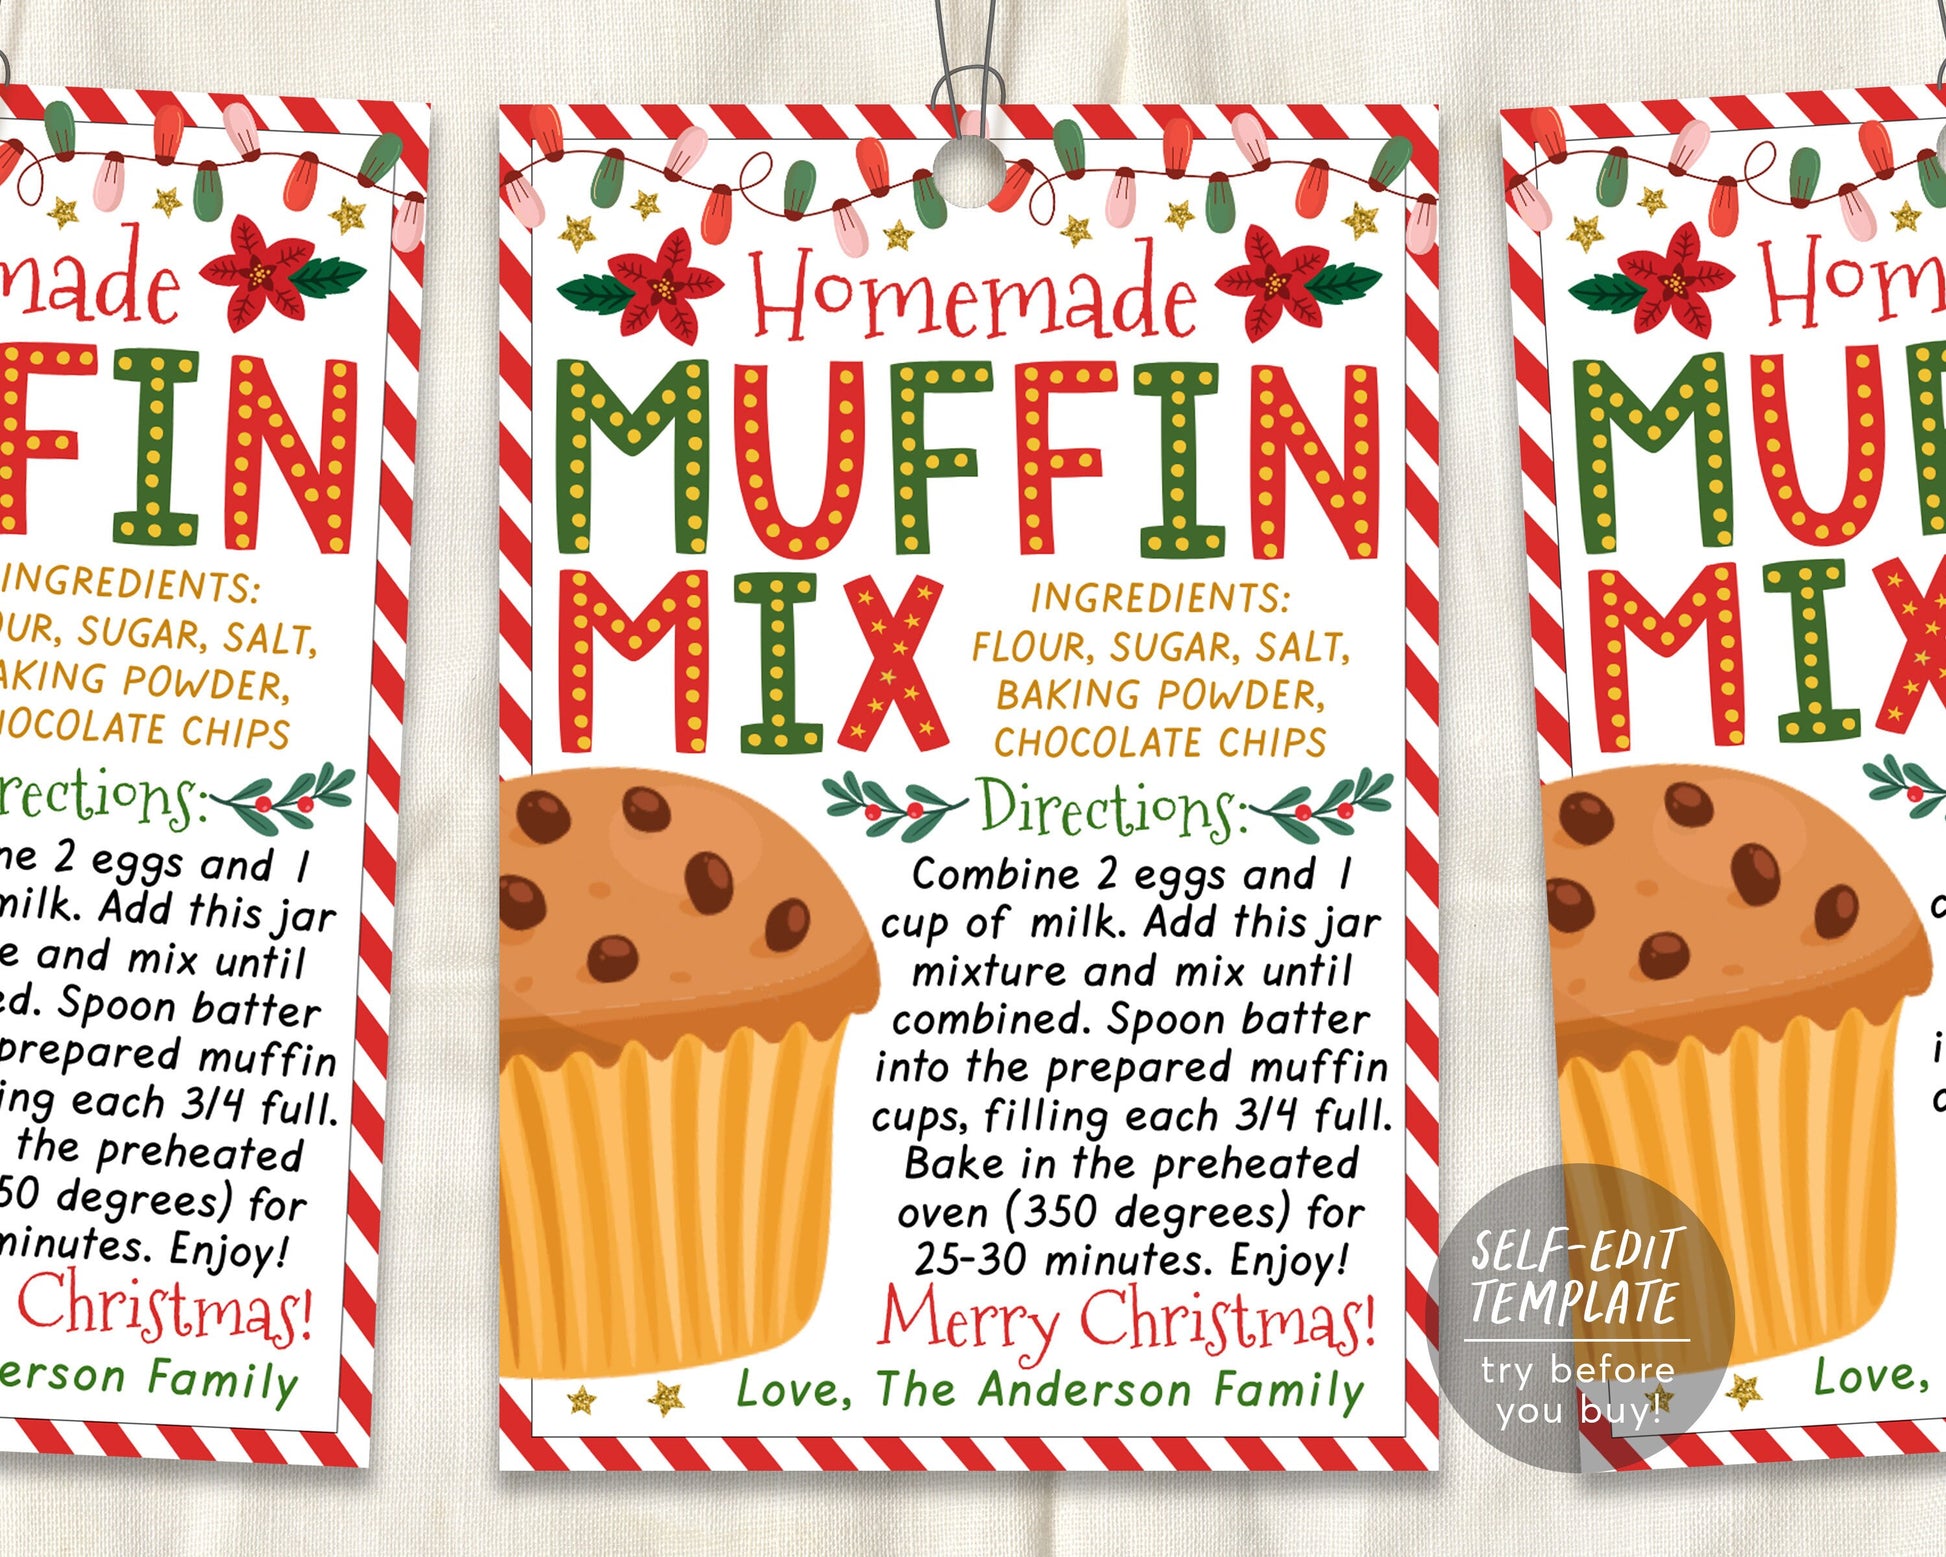 Made with Love Tags, Christmas Gift Tags, Homemade Gift, Baked